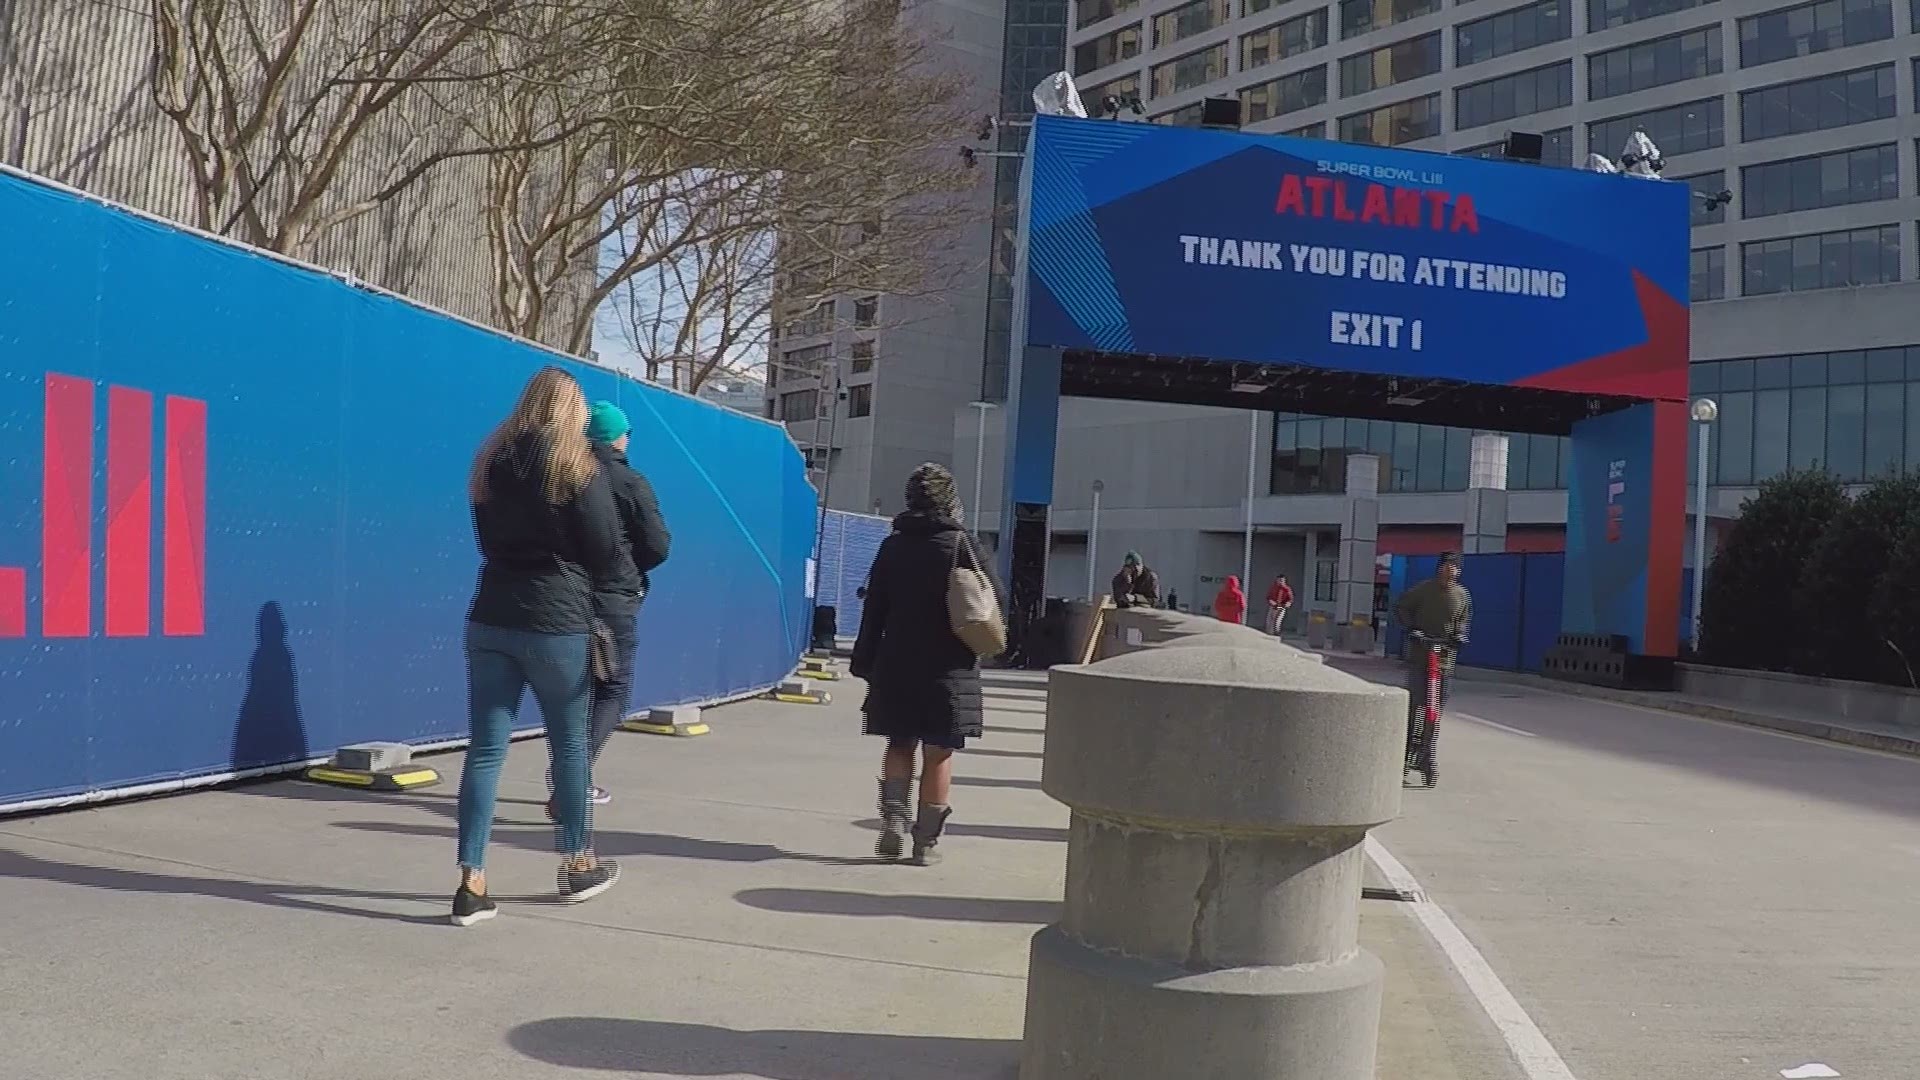 It’s been nearly two weeks since Atlanta hosted Super Bowl LIII, but some workers who helped make the experience come to life still haven’t gotten a paycheck.